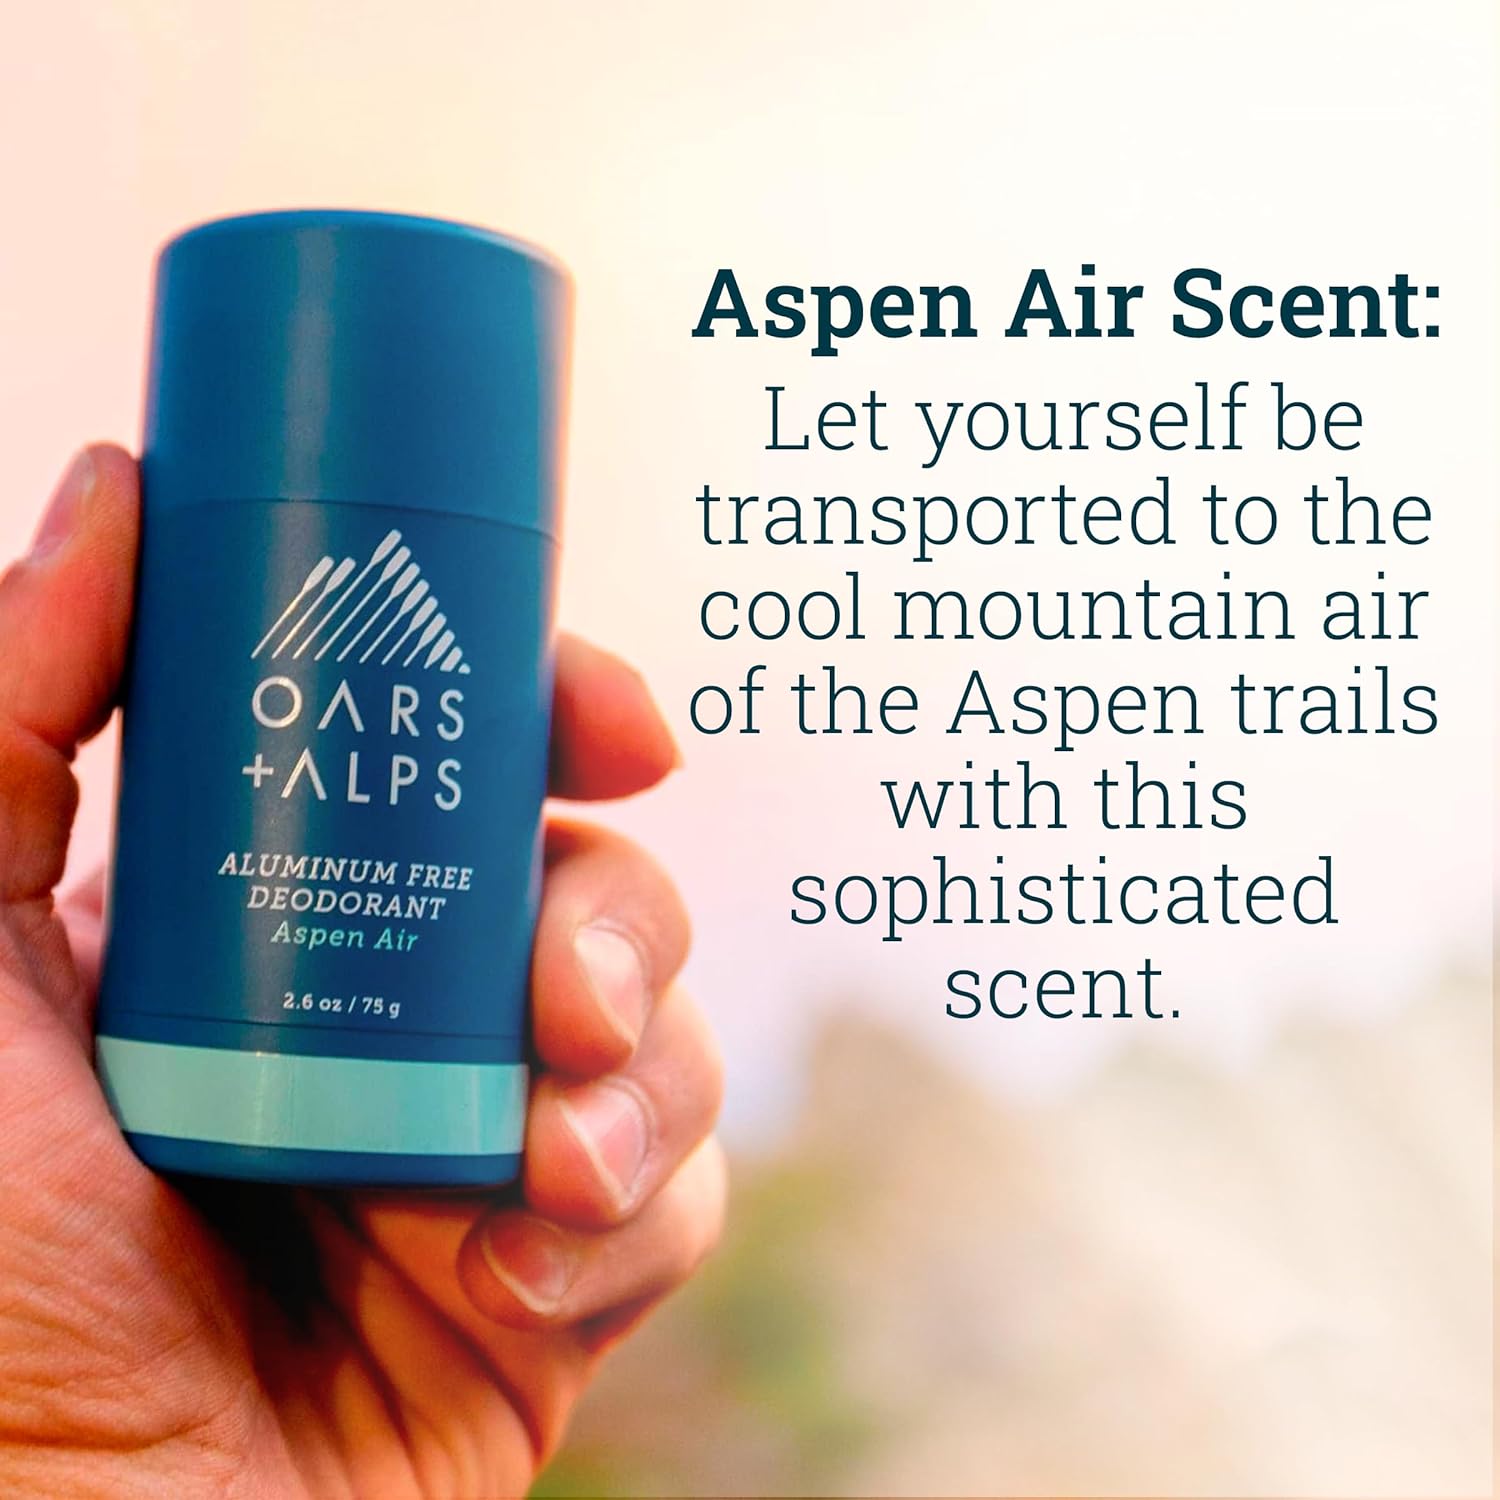 Oars + Alps Aluminum Free Deodorant for Men and Women, Dermatologist Tested and Made with Clean Ingredients, Travel Size, Aspen Air, 1 Pack, 2.6 Oz : Beauty & Personal Care